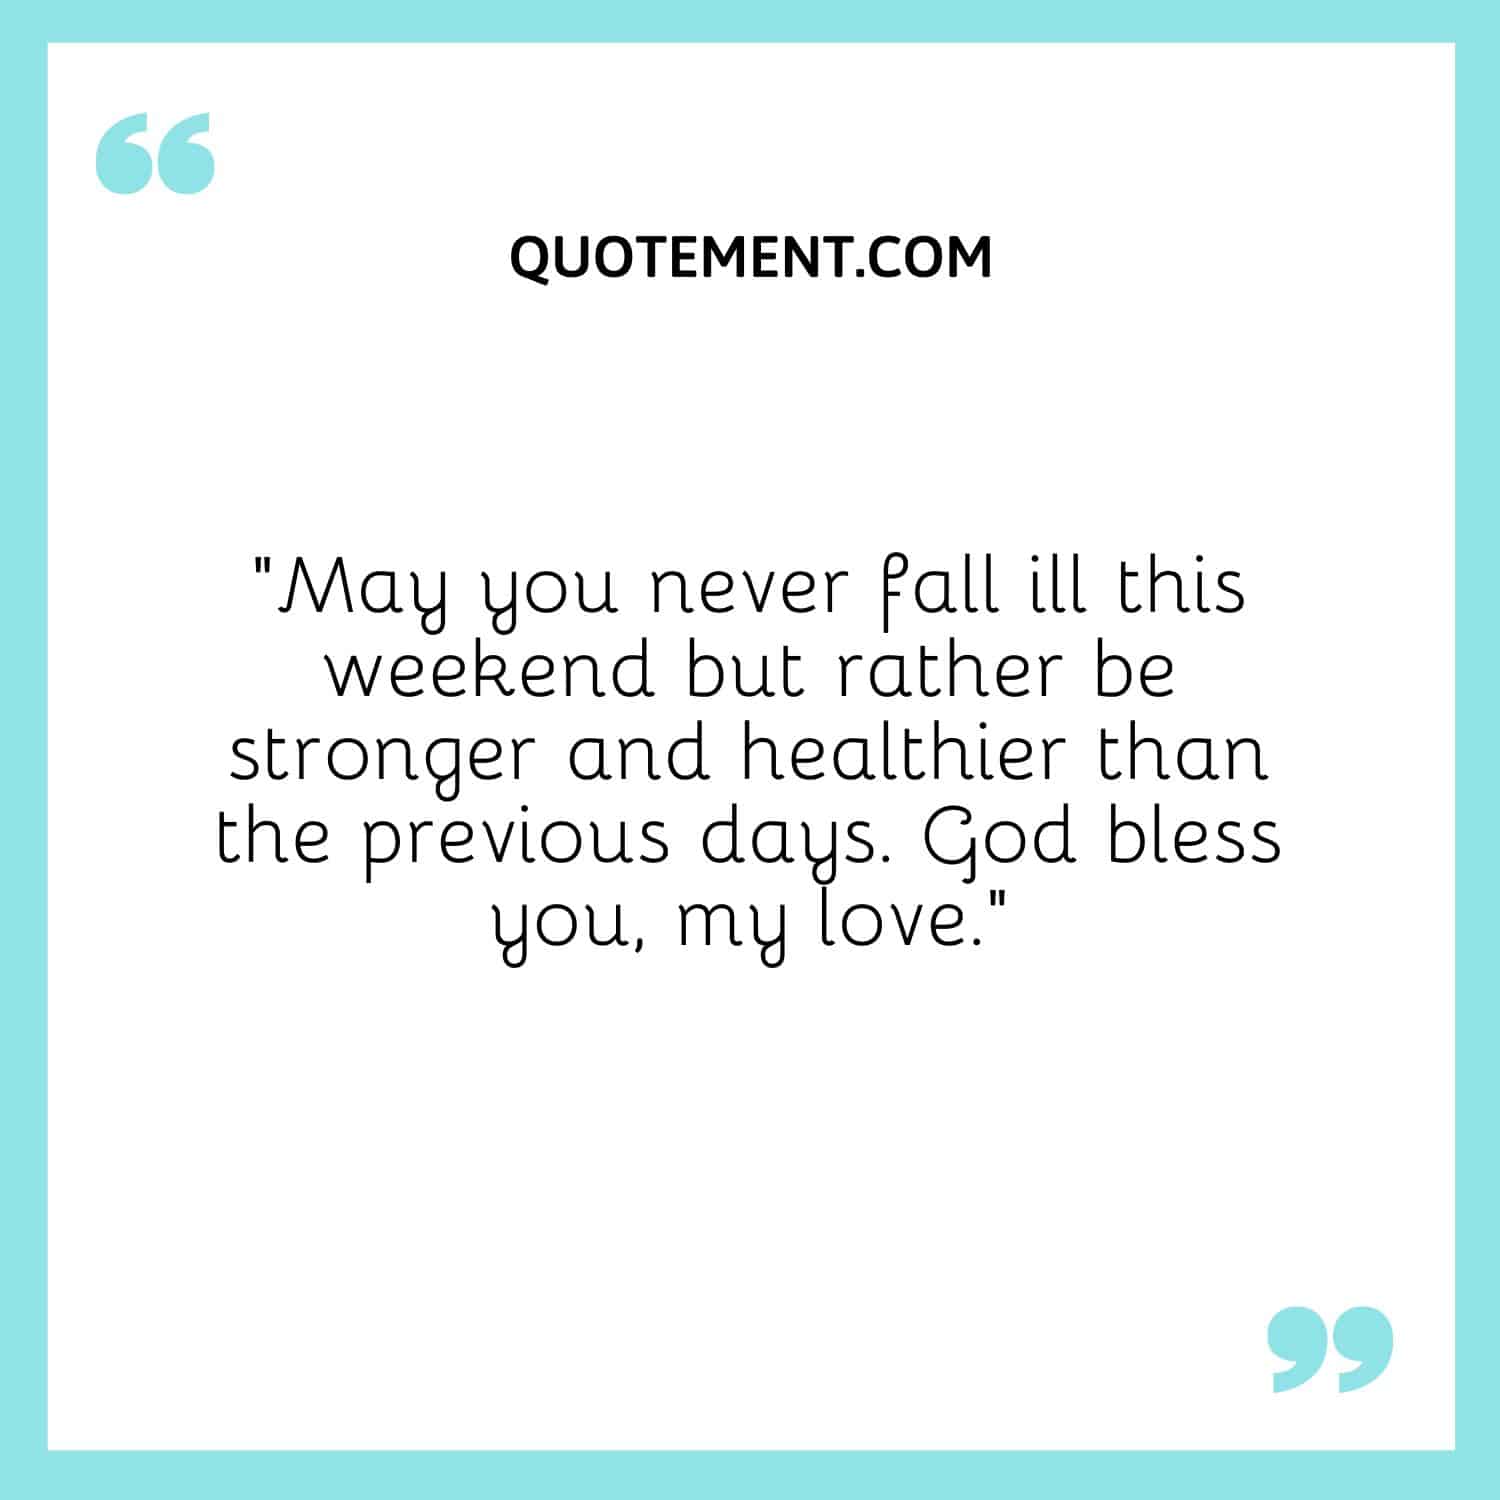 “May you never fall ill this weekend but rather be stronger and healthier than the previous days. God bless you, my love.”